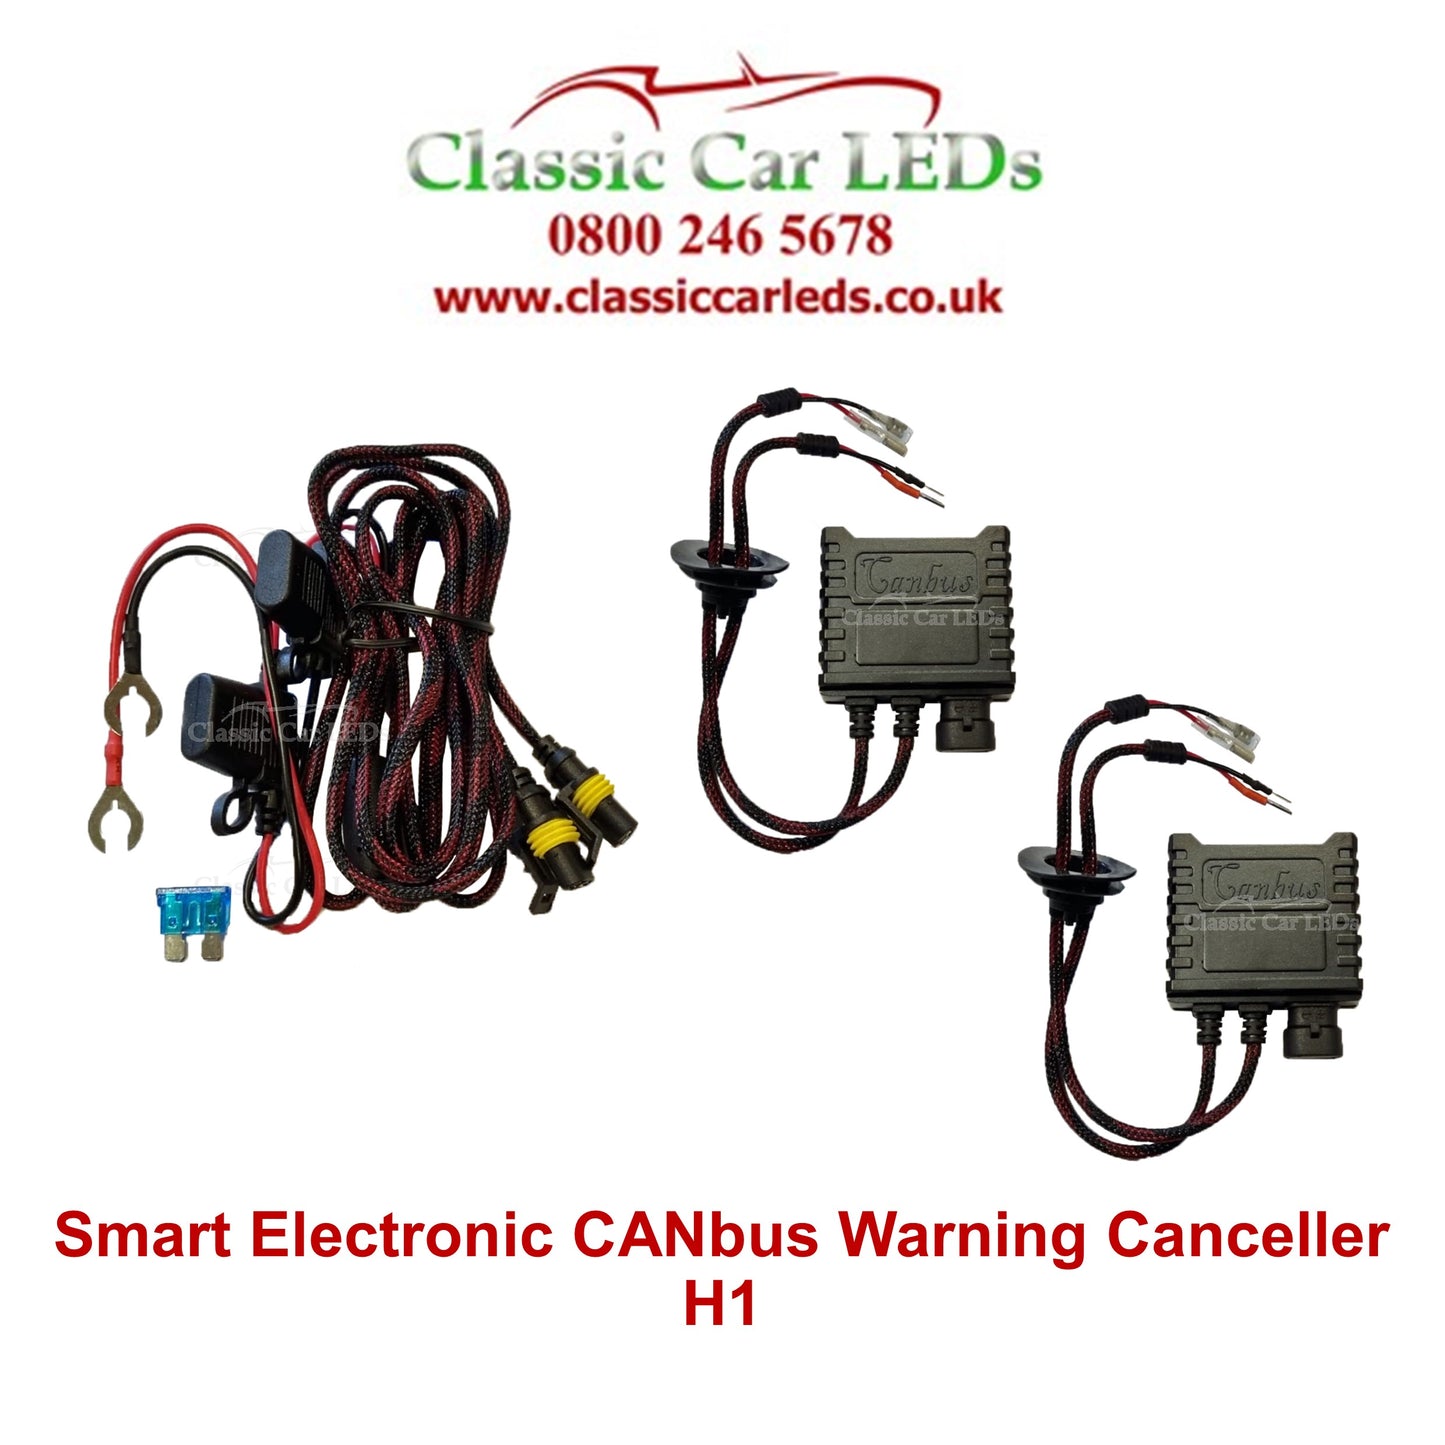 Intelligent Electronic CANbus LED and HID Headlight OBC Warning cancellers H1, H4, H7, H8, H9, H11, HB3, HB4